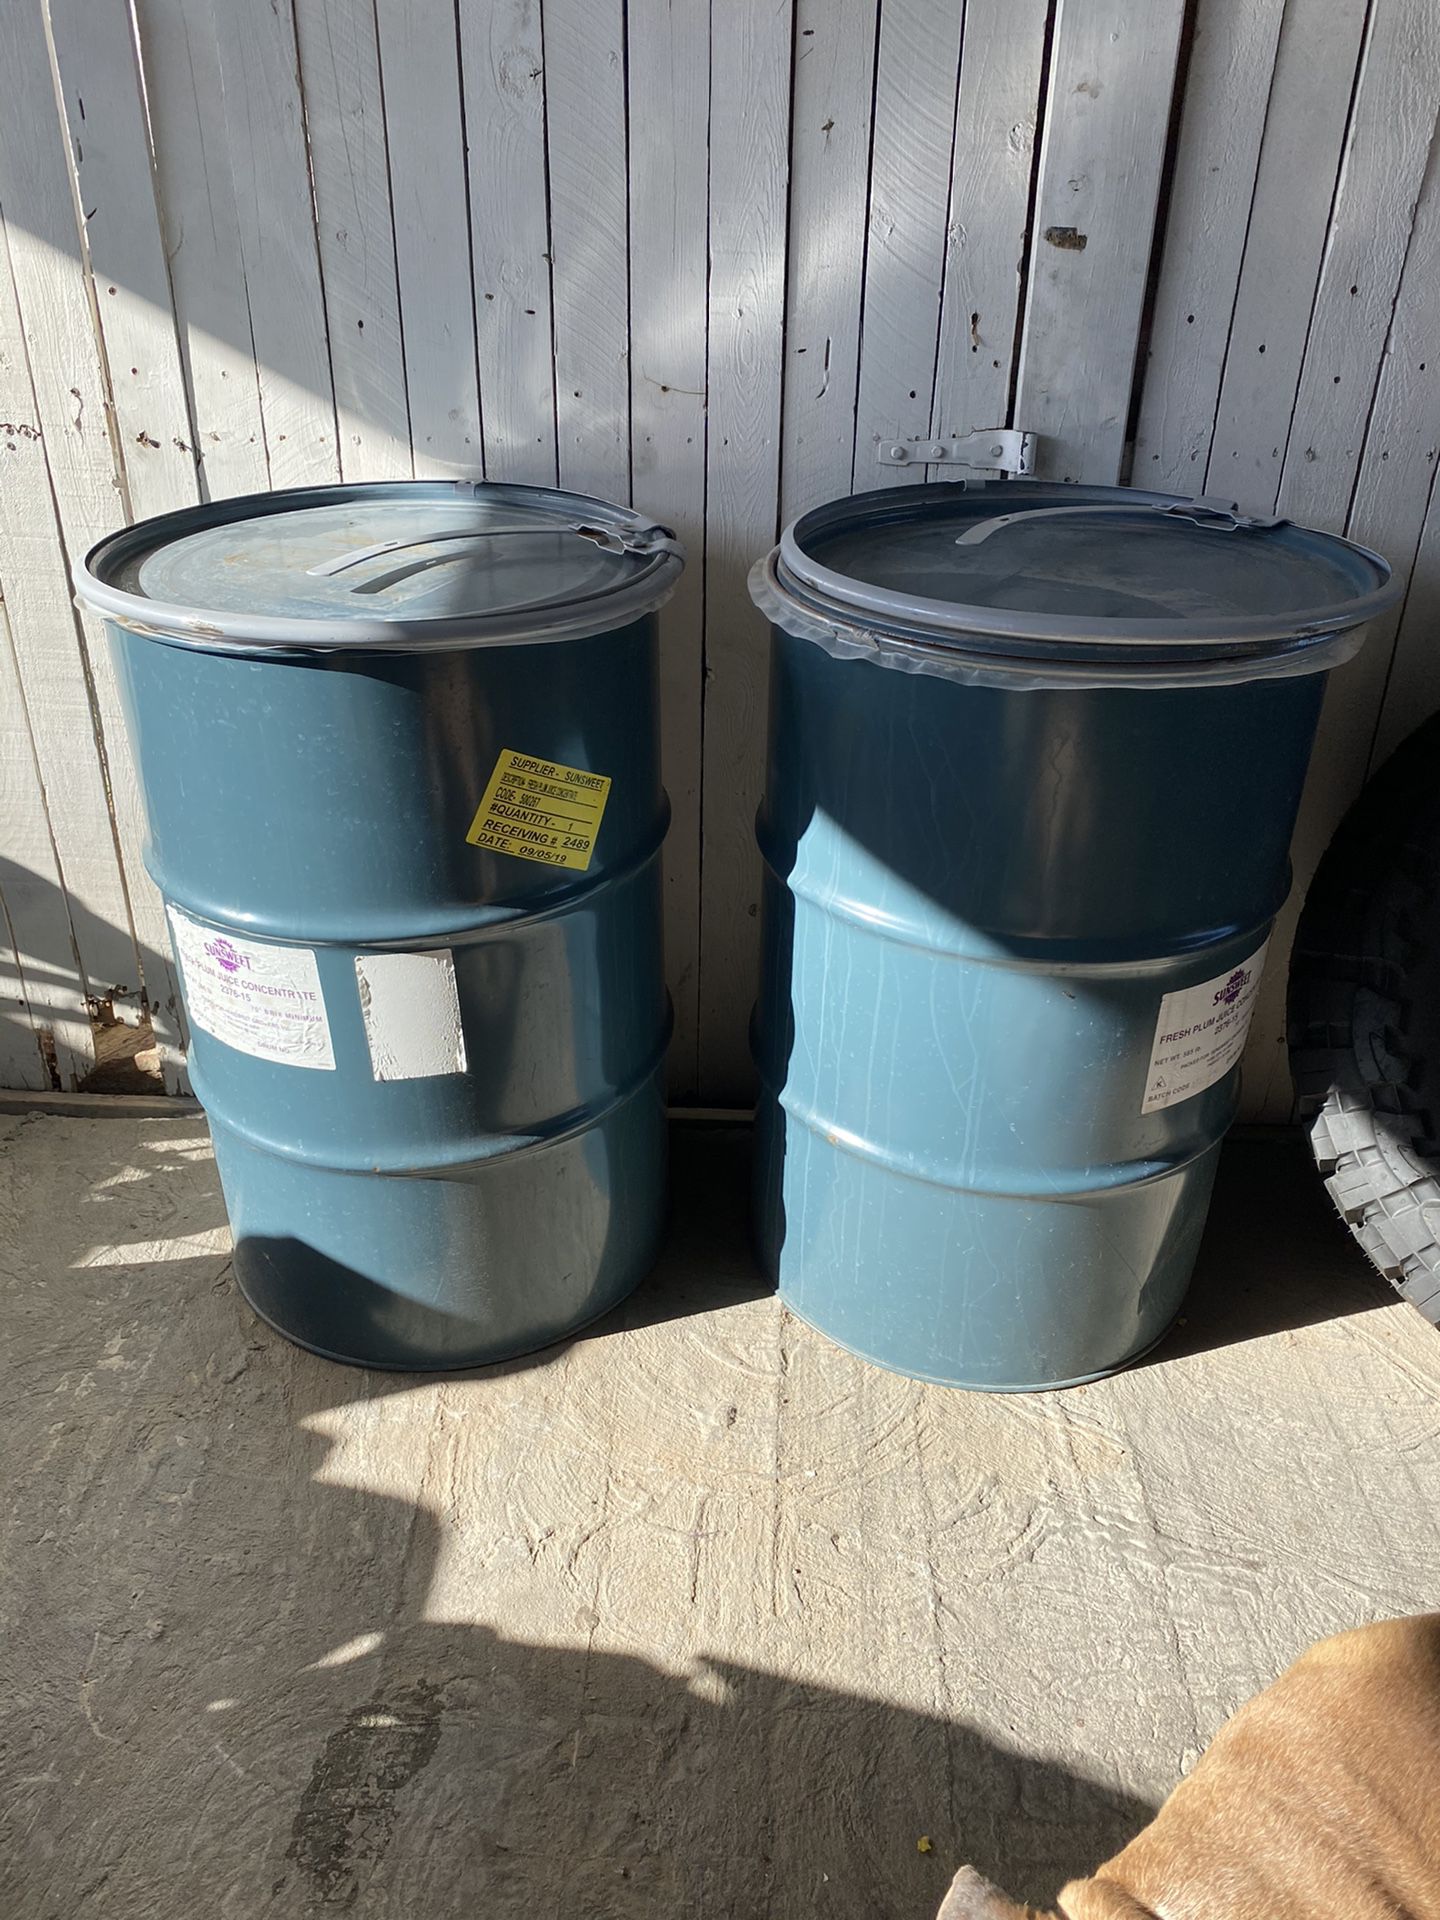 55 Gallon Drum With in In-Line Plastic Bag-Had Grape Juice inside-$25 each-Firm in Price